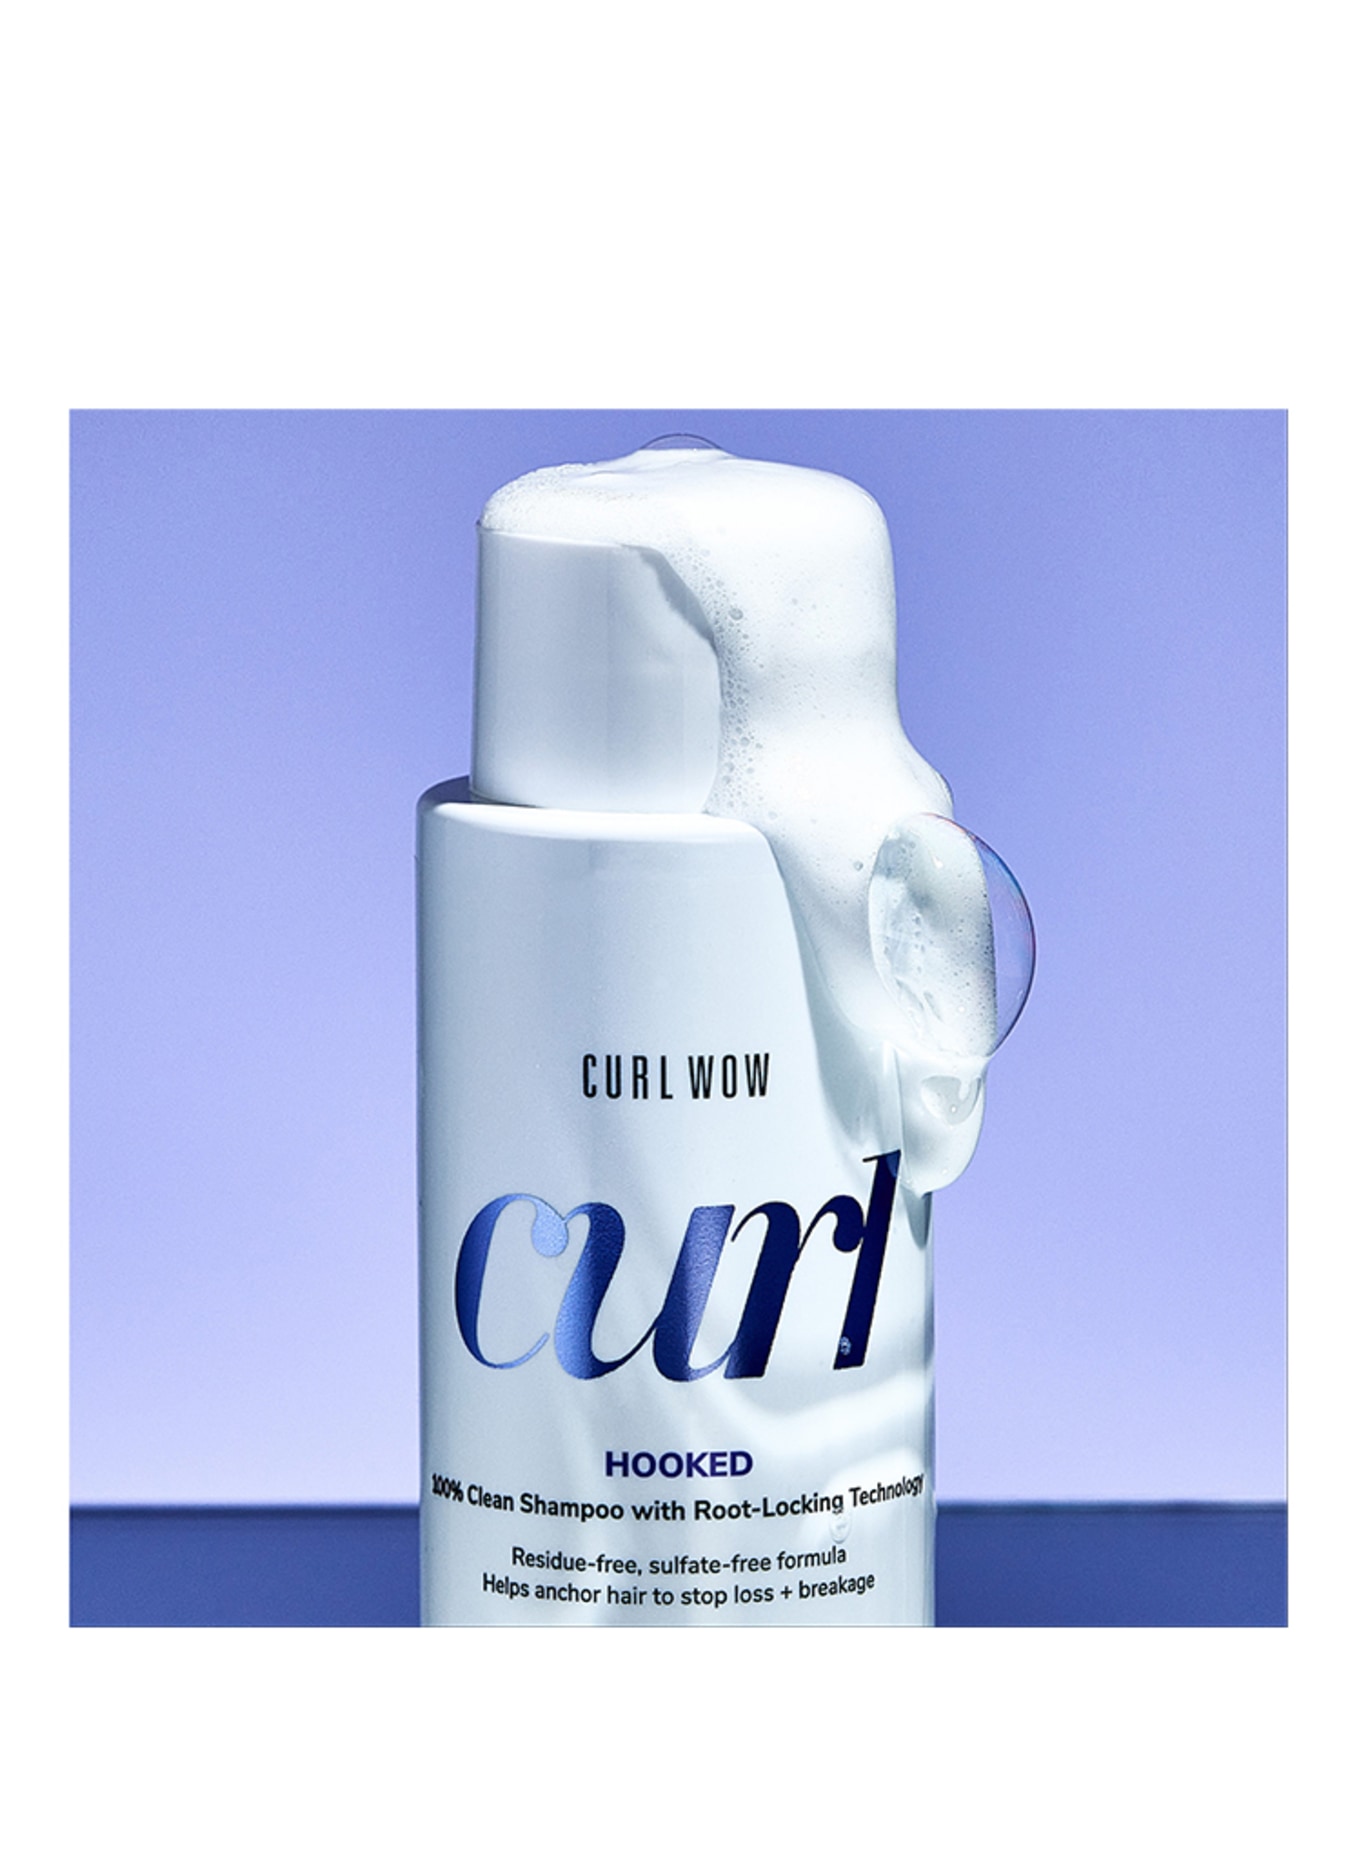 COLOR WOW CURL WOW HOOKED CLEAN SHAMPOO (Bild 2)